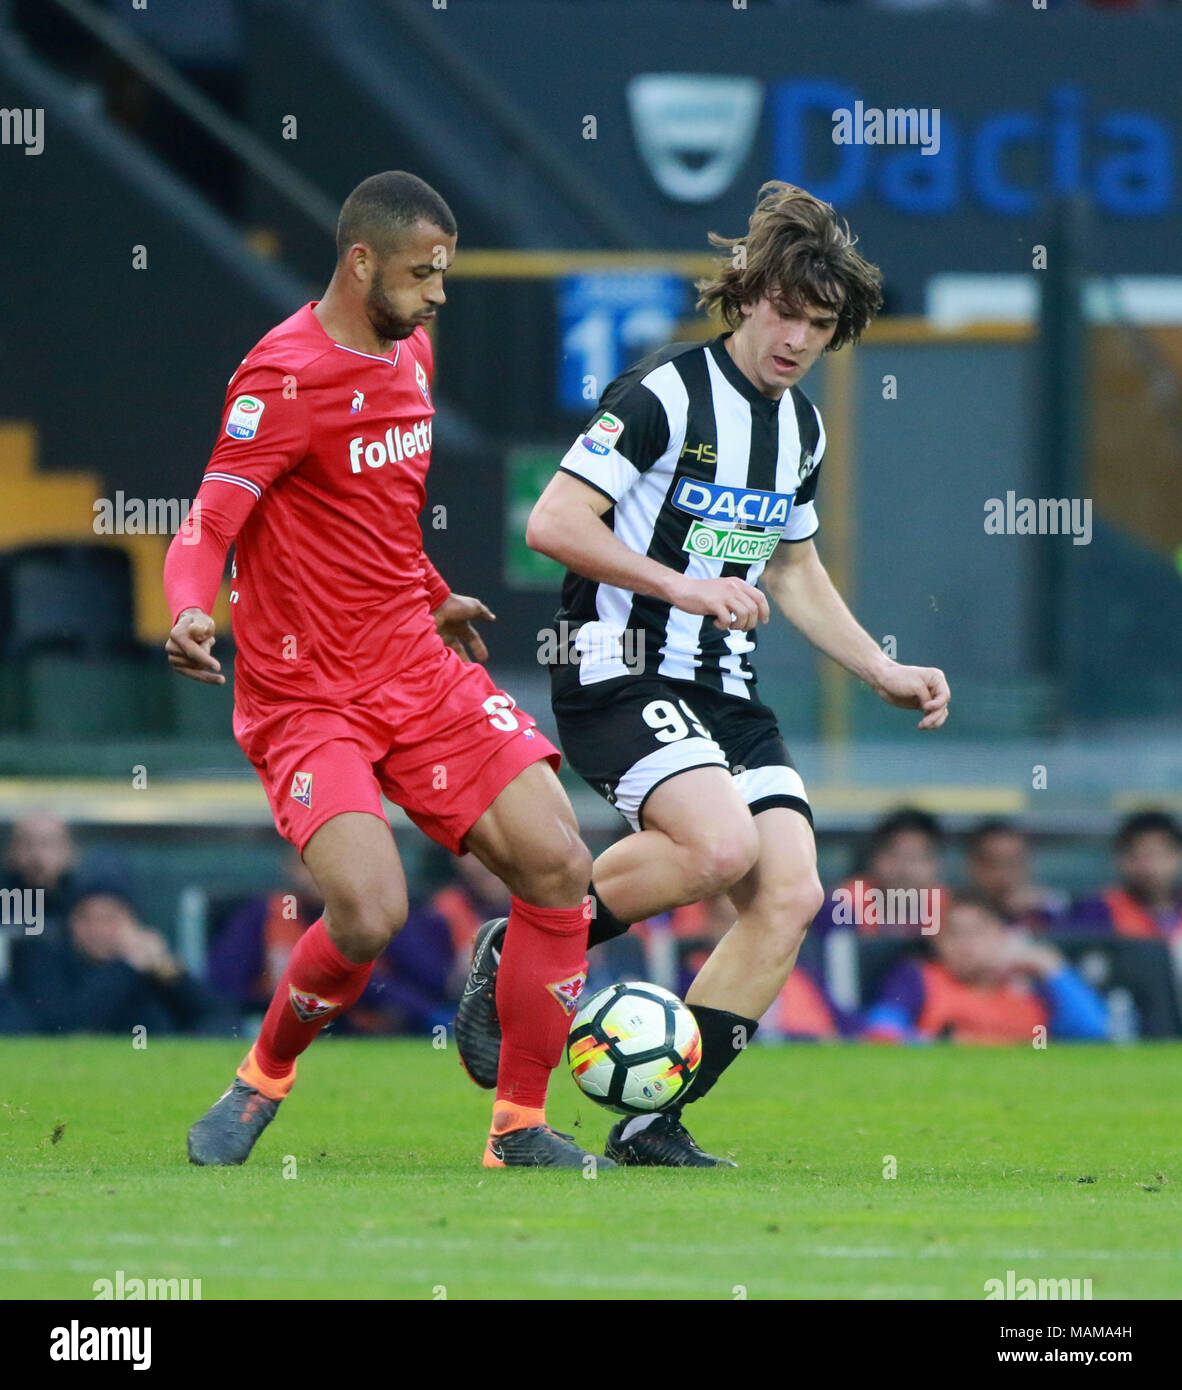 Udine, Italy. 3rd April, 2018. ITALY, Udine: Fiorentina's defender Vitor Hugo (L) vies with Udinese's midfielder Andrija Balic  (R) during the Serie A football match between Udinese Calcio v AC Fiorentina at Dacia Arena Stadium on 3rd April, 2018. Credit: Andrea Spinelli/Alamy Live News Stock Photo